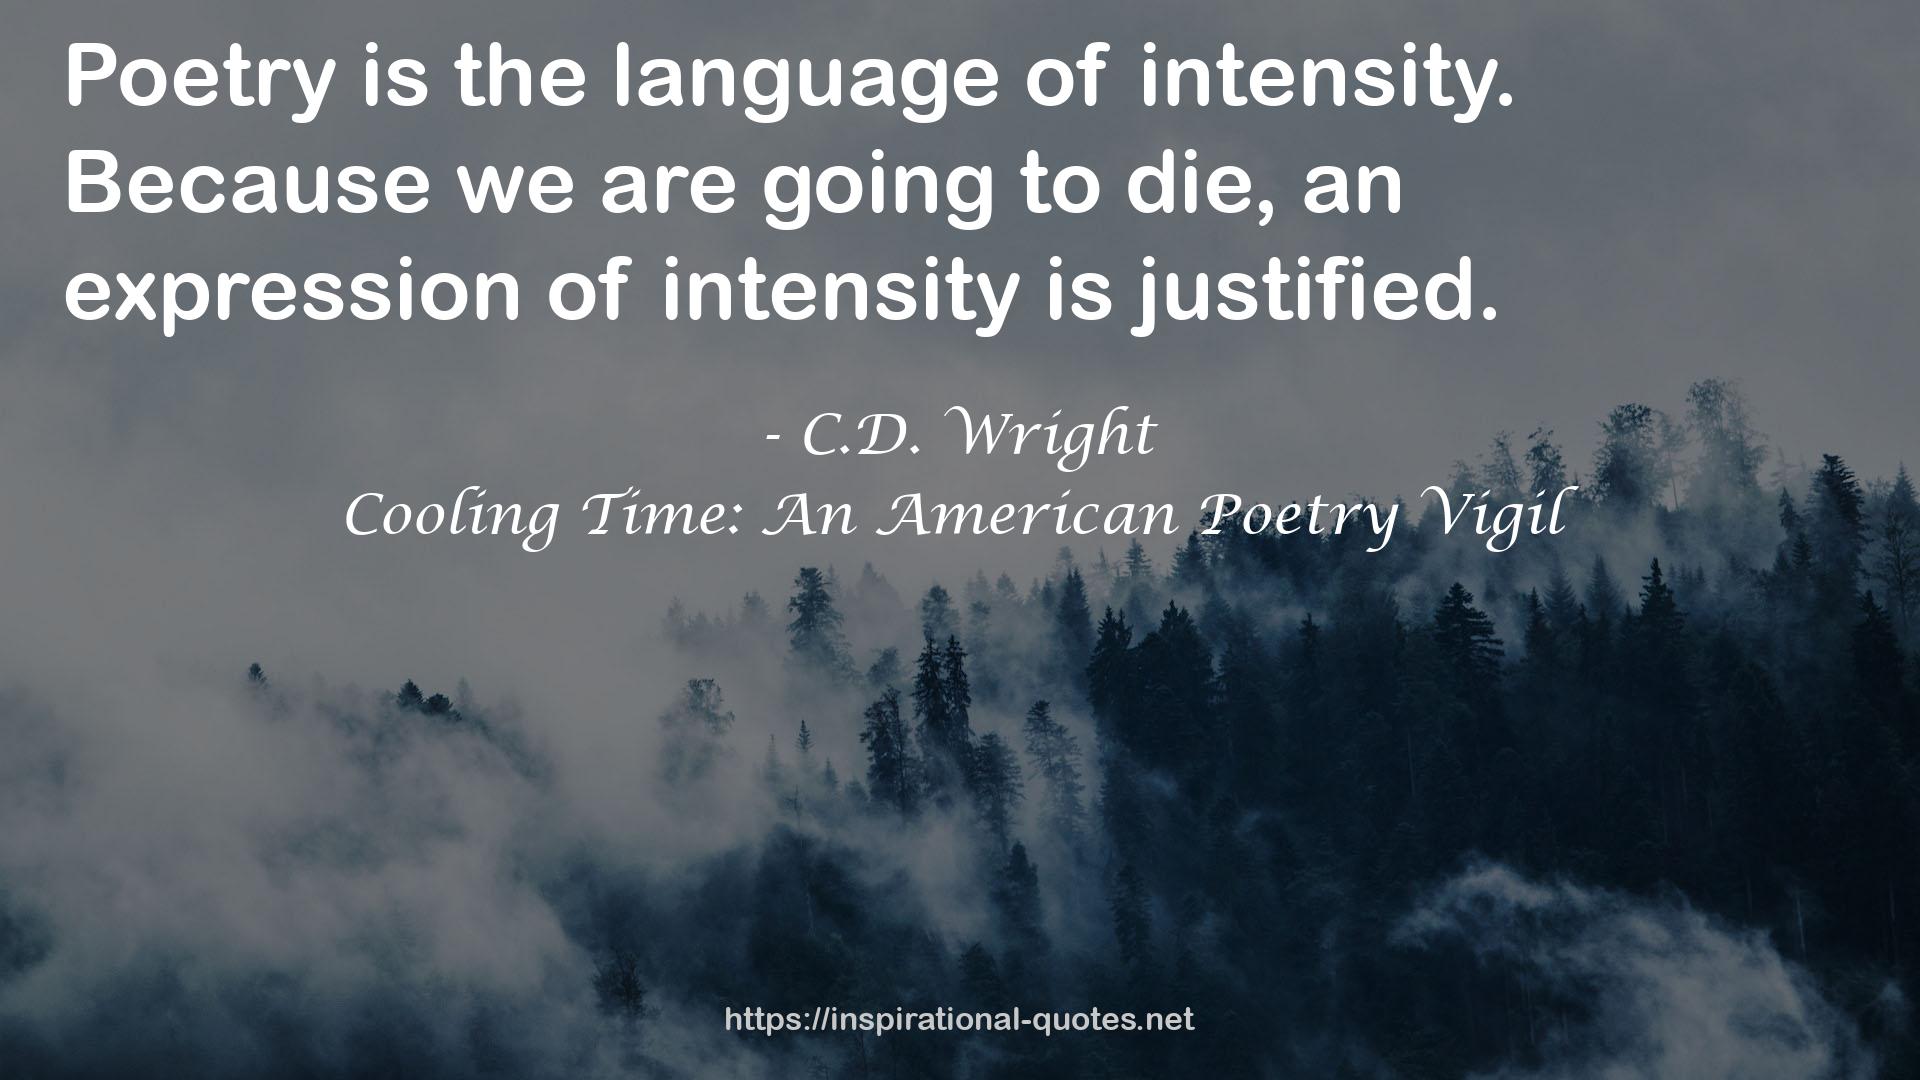 Cooling Time: An American Poetry Vigil QUOTES